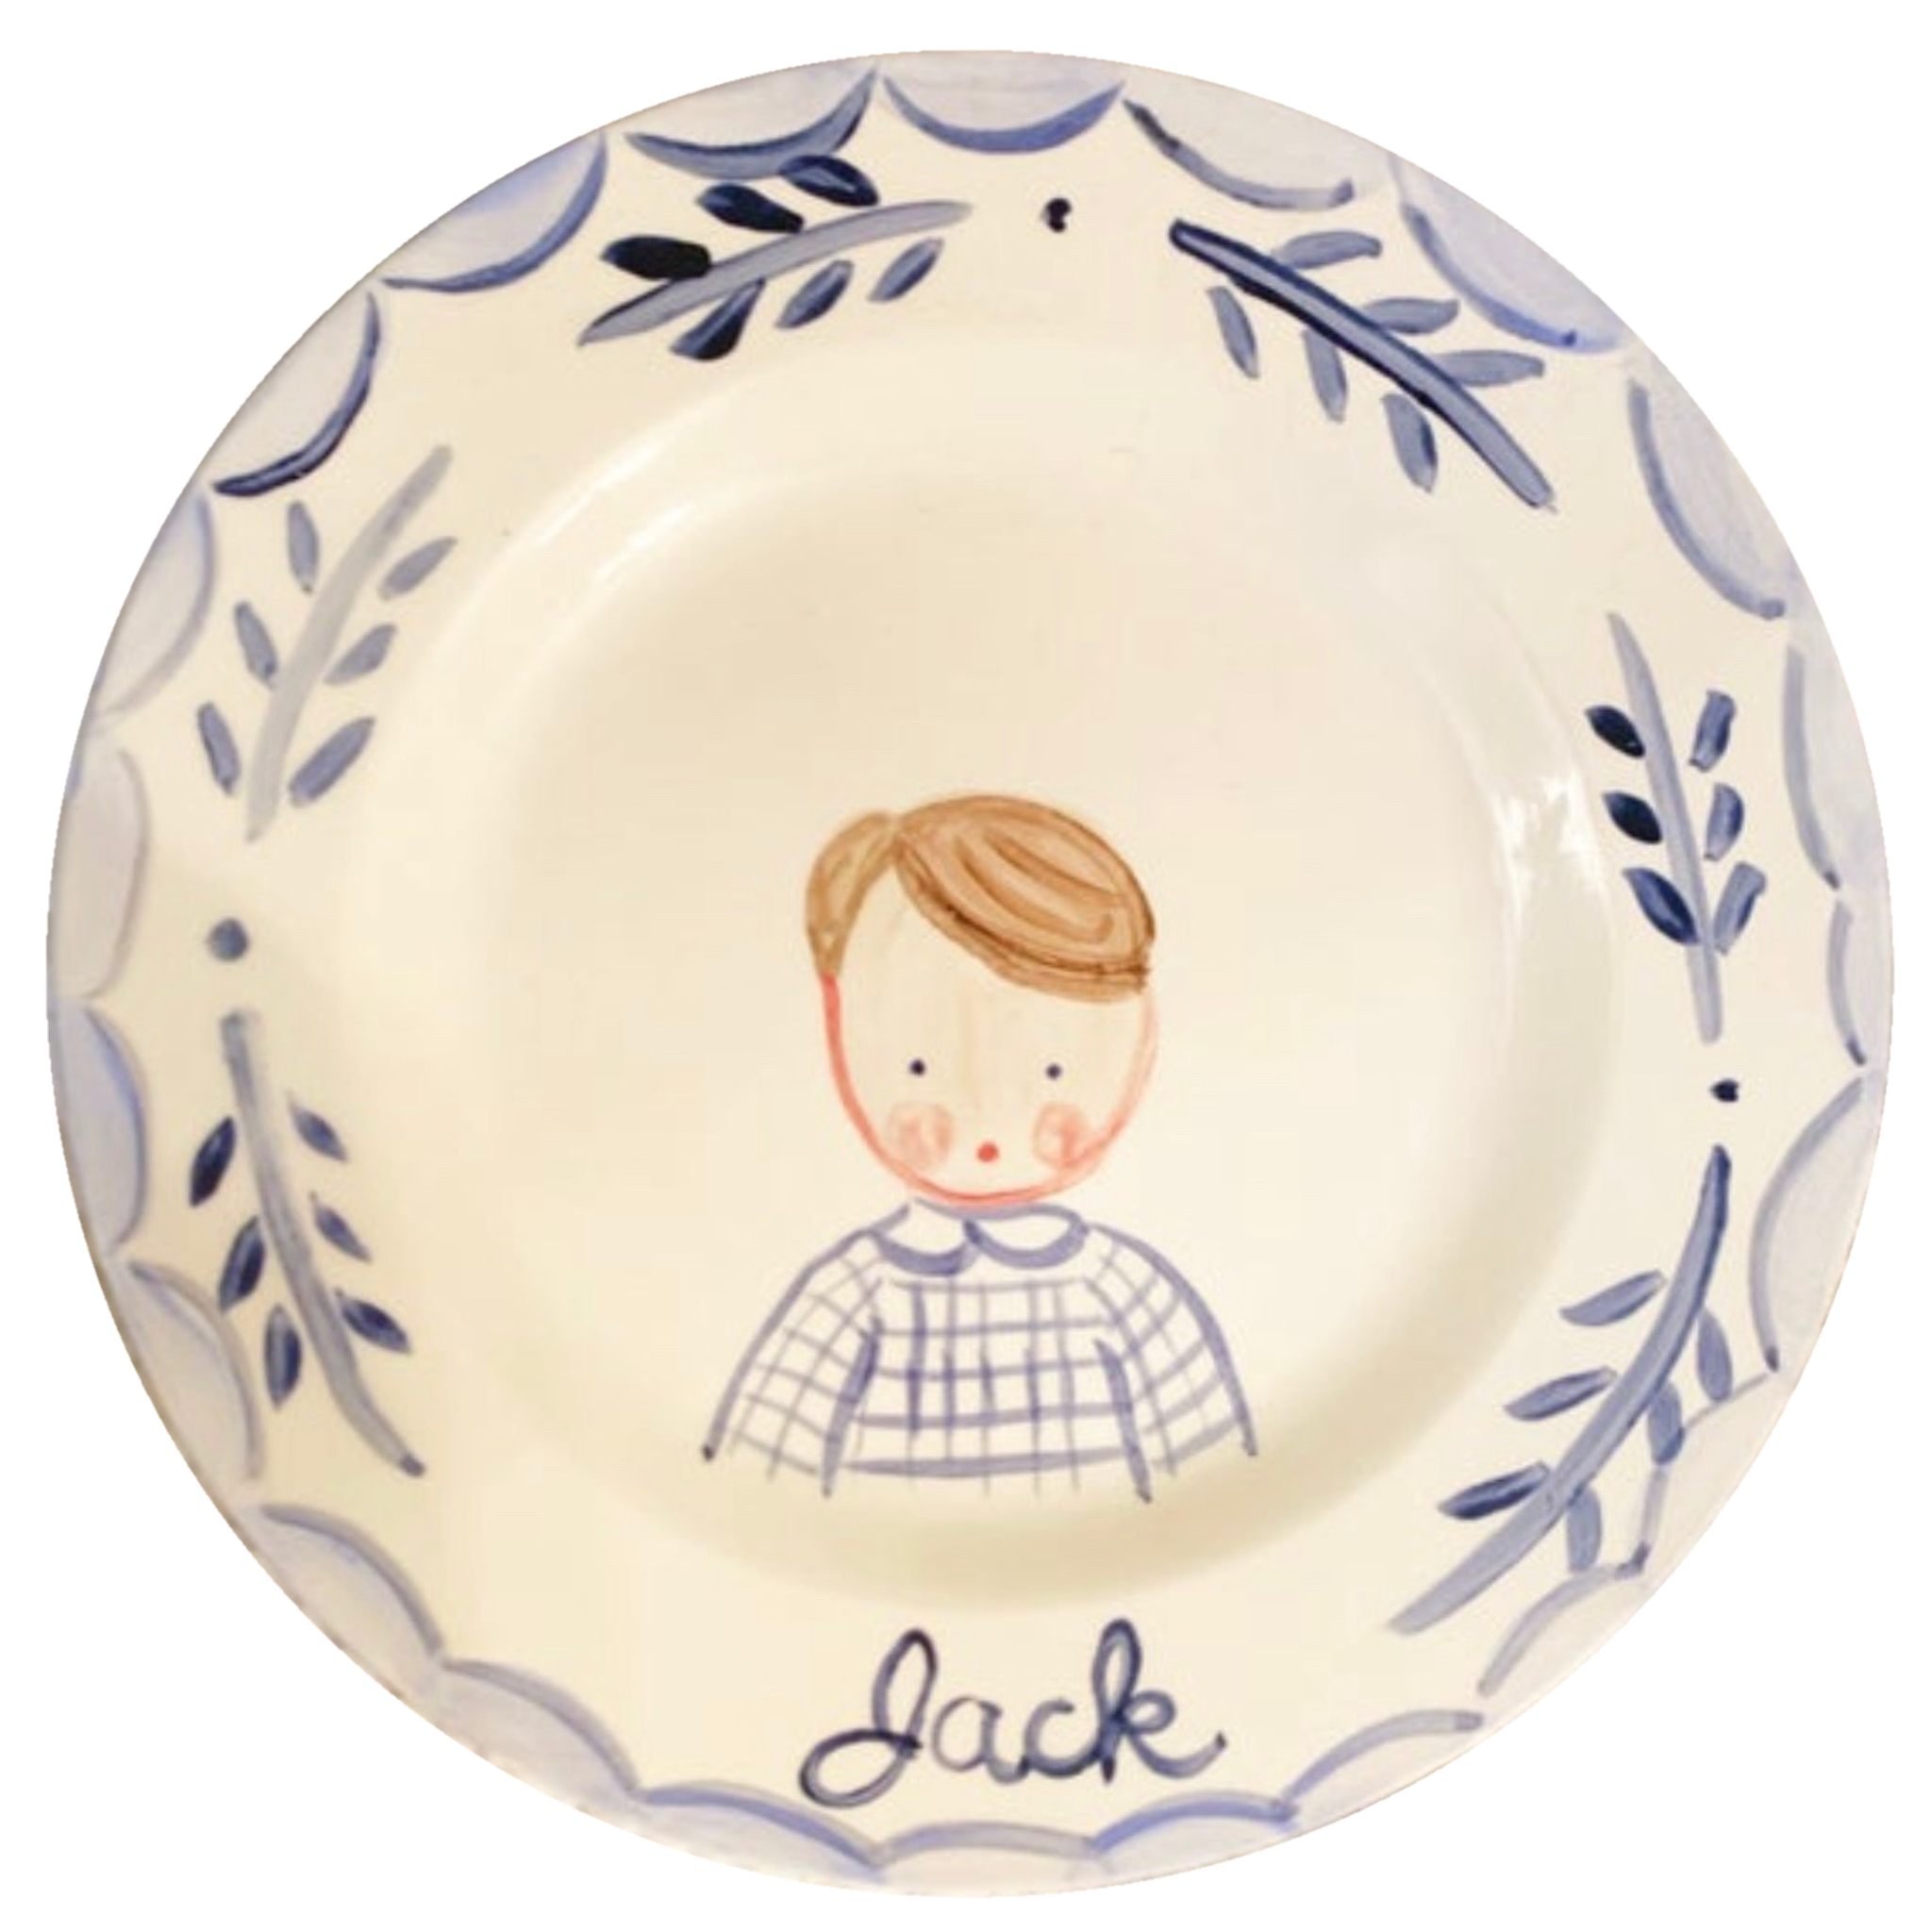 Simple Boy's Plate - Tricia Lowenfield Design